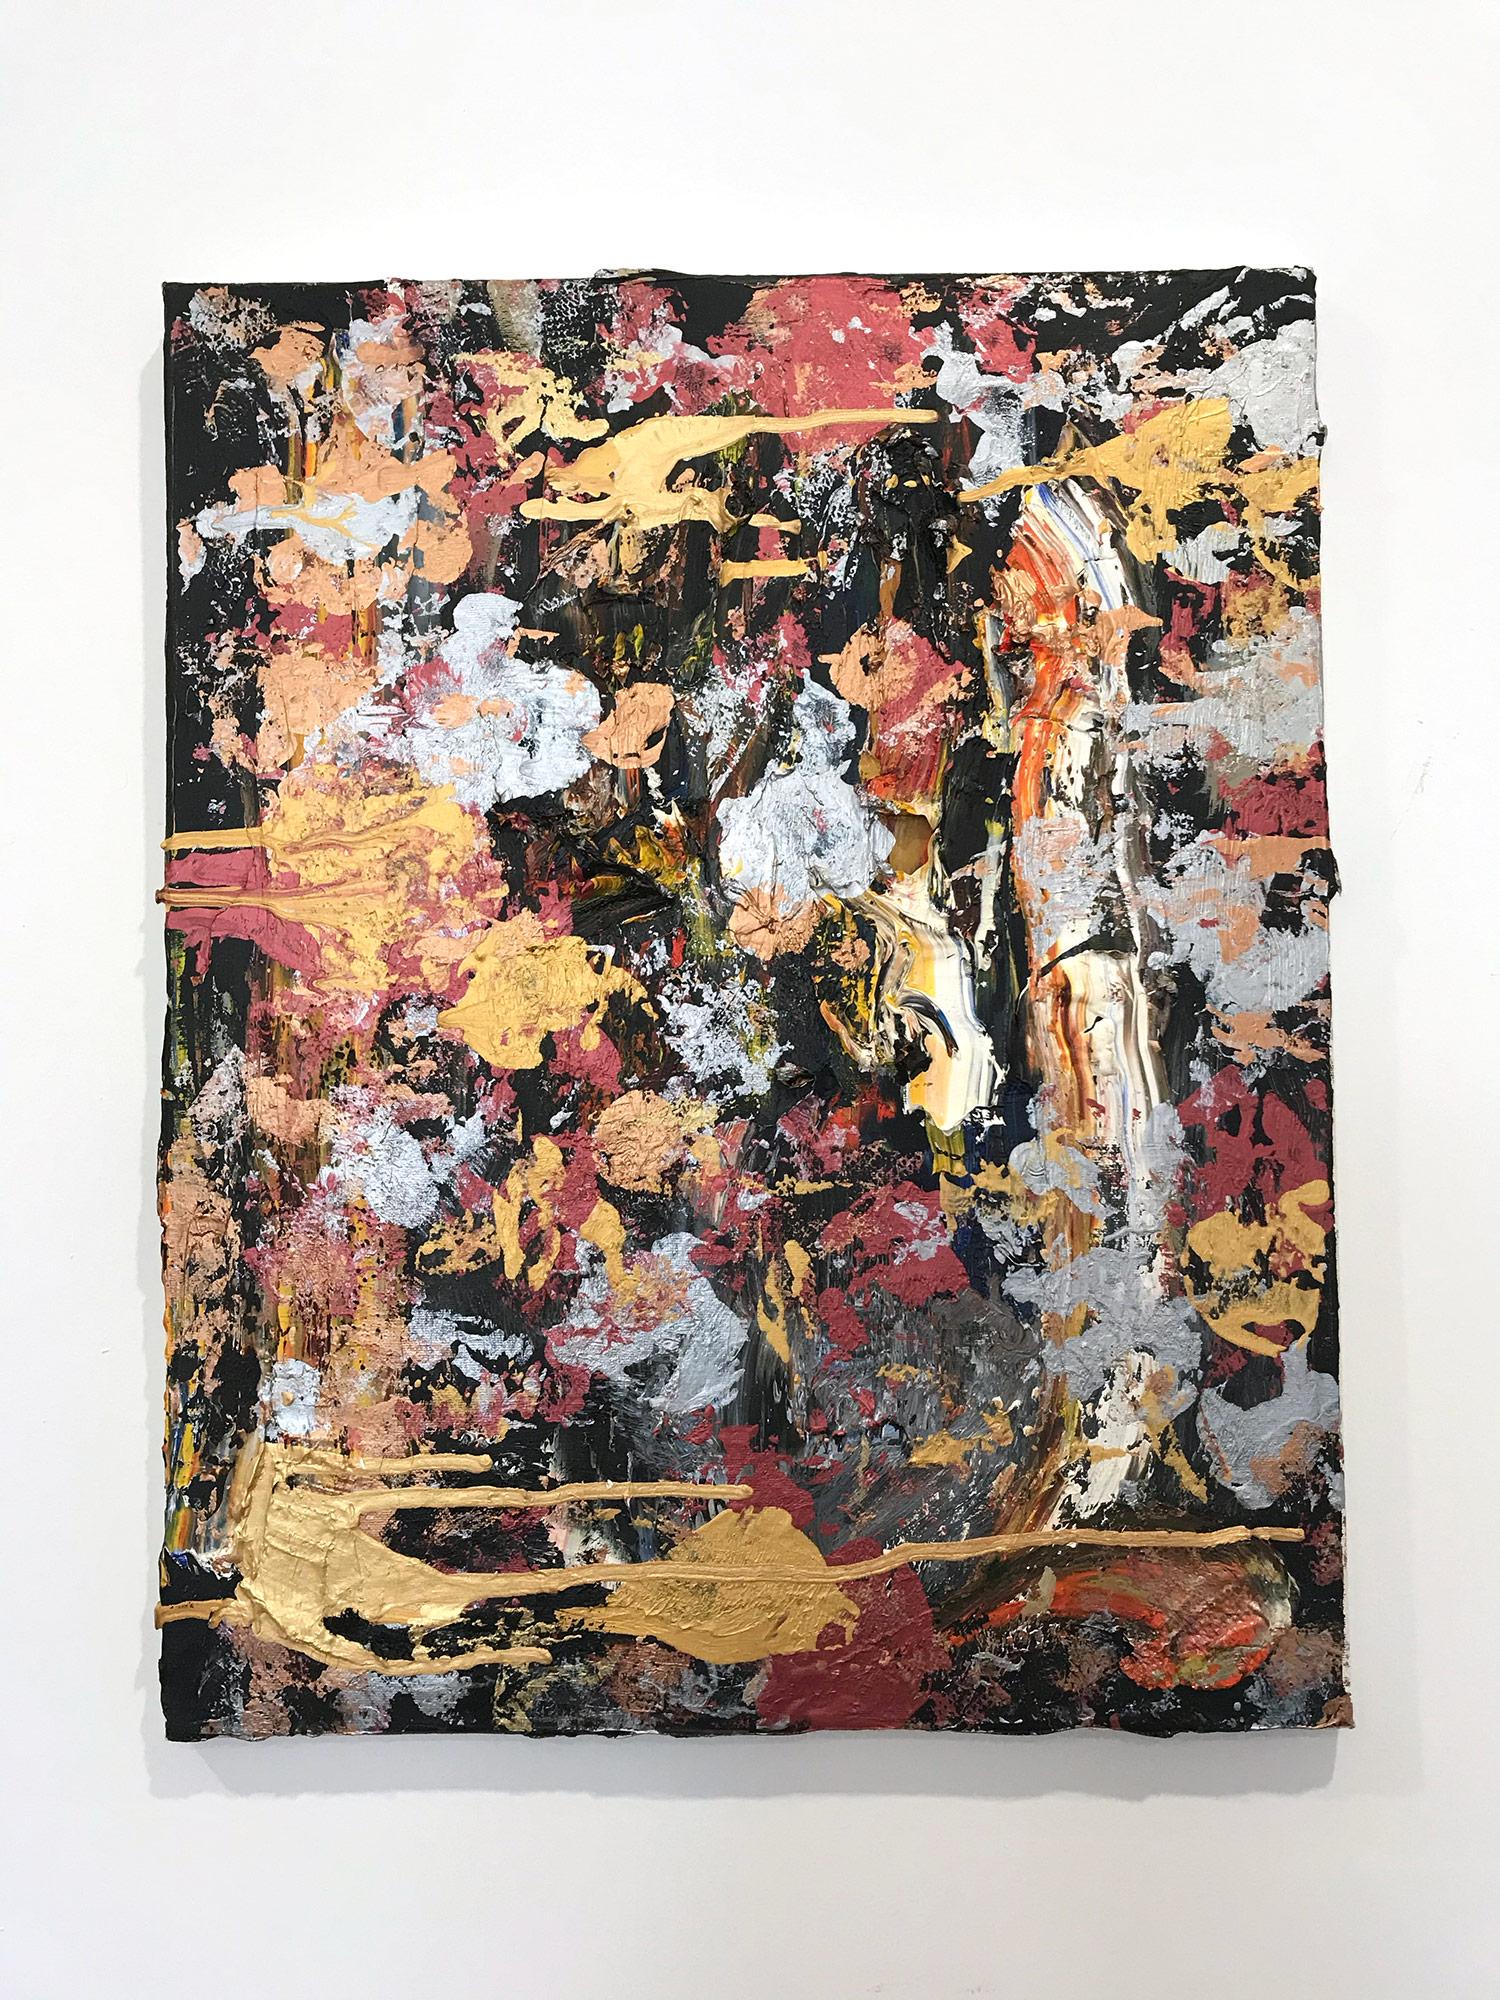 With layers of bright oils and whisking brush strokes, the paint is able to shine and shimmer in a very unique pattern. The artist uses gold drips, mixed media and, pieces of glass to add a very contemporary, Urban feel. The way the paint blends and